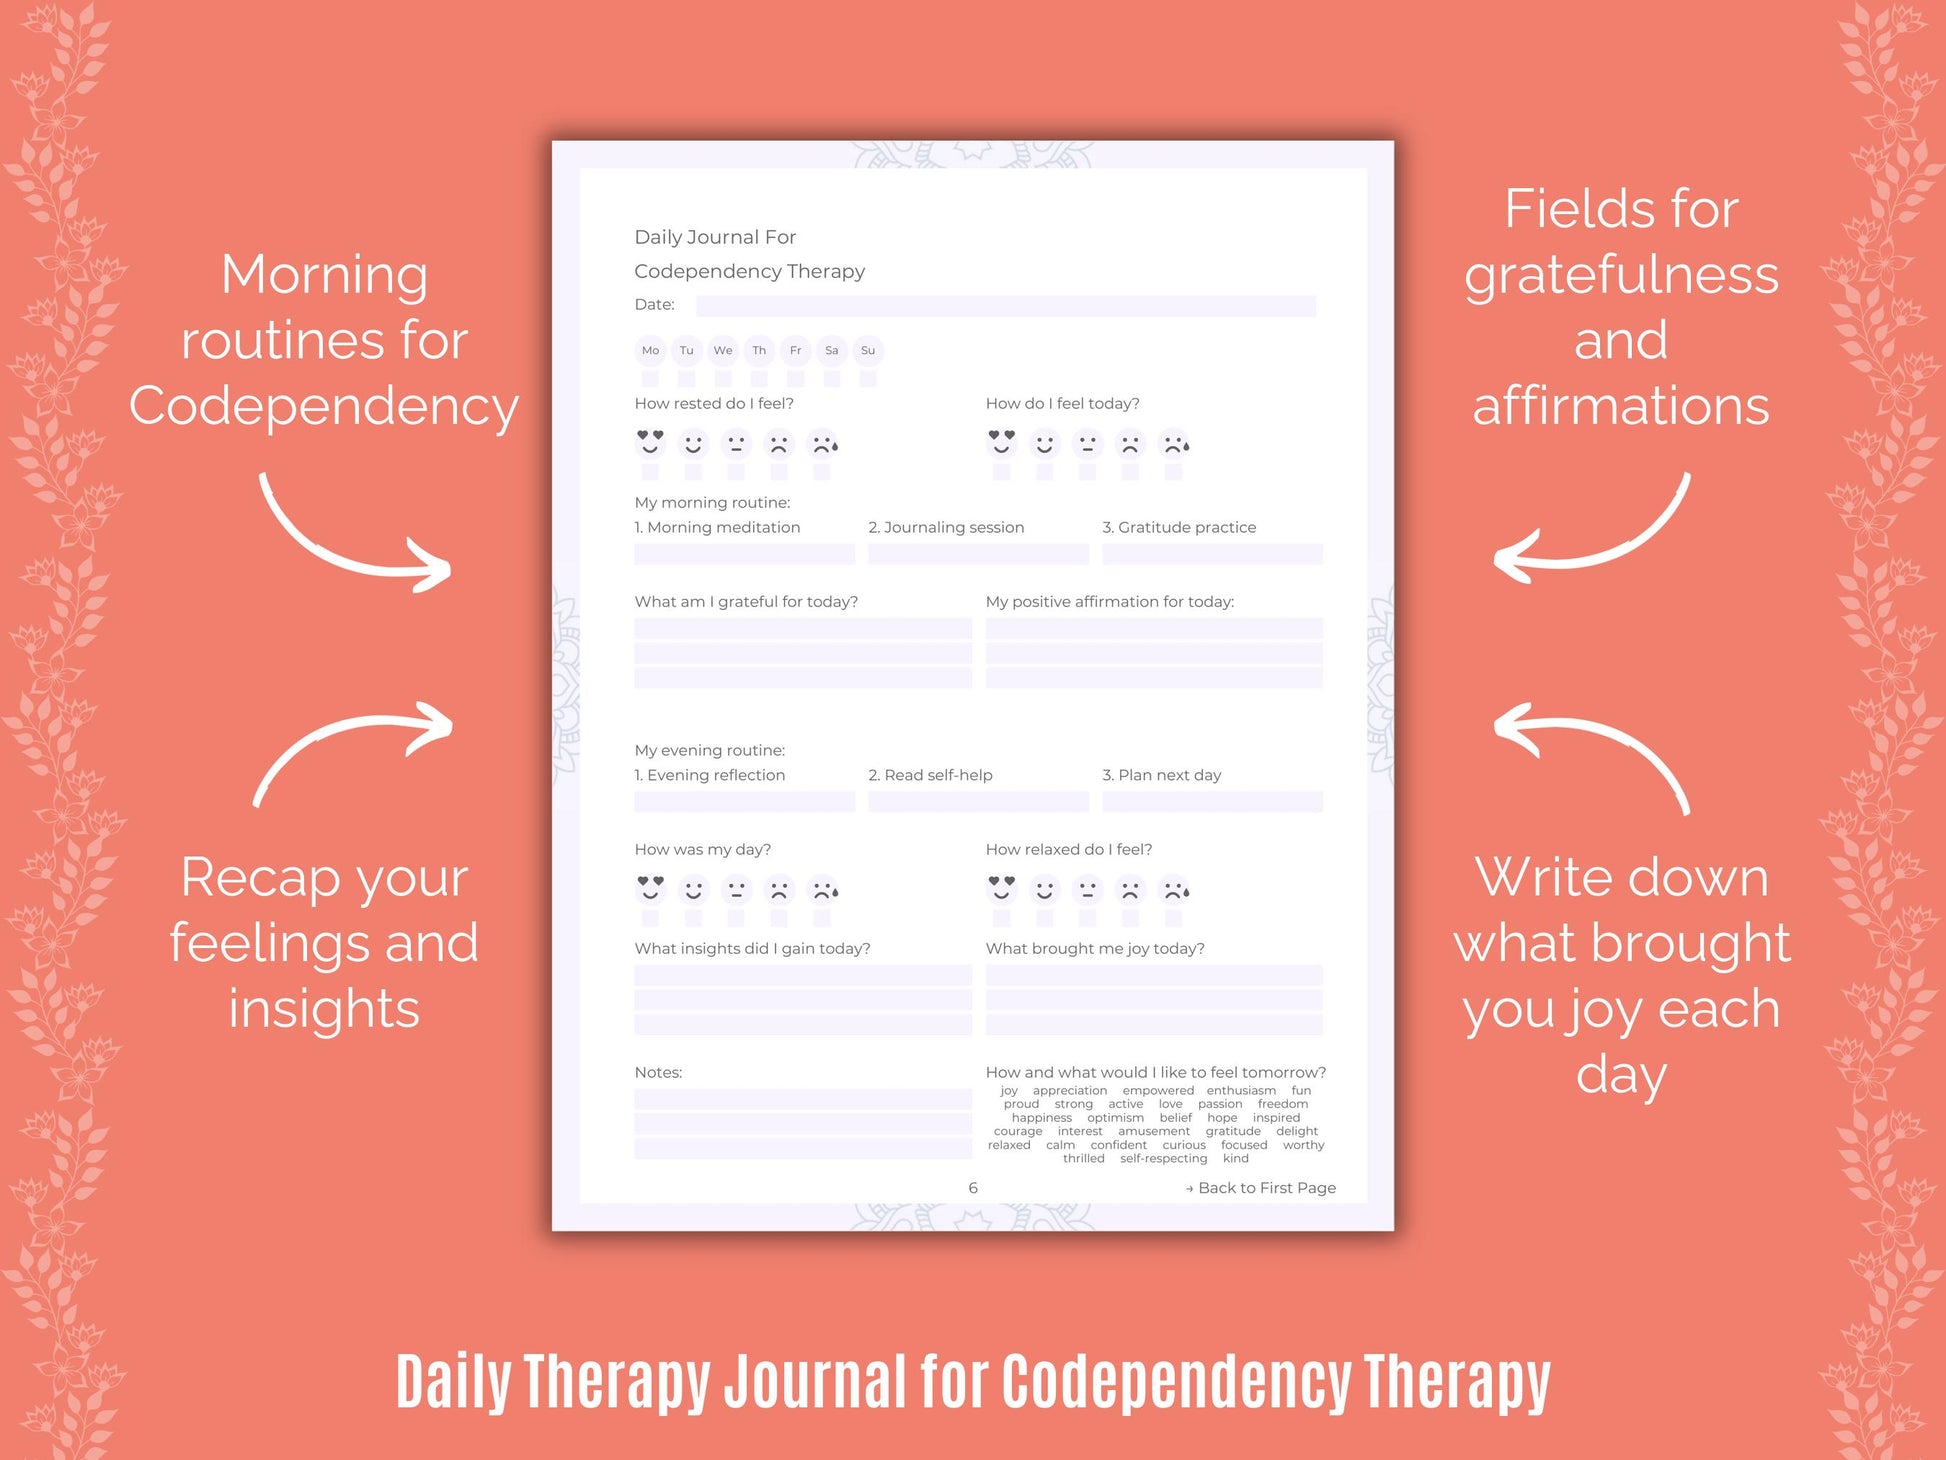 Codependency Therapy, Counseling, Workbooks, Journaling, Journals, Codependency Notes, Codependency Tools, Planners, Resources, Cheat Sheet, Goal Setting, Templates